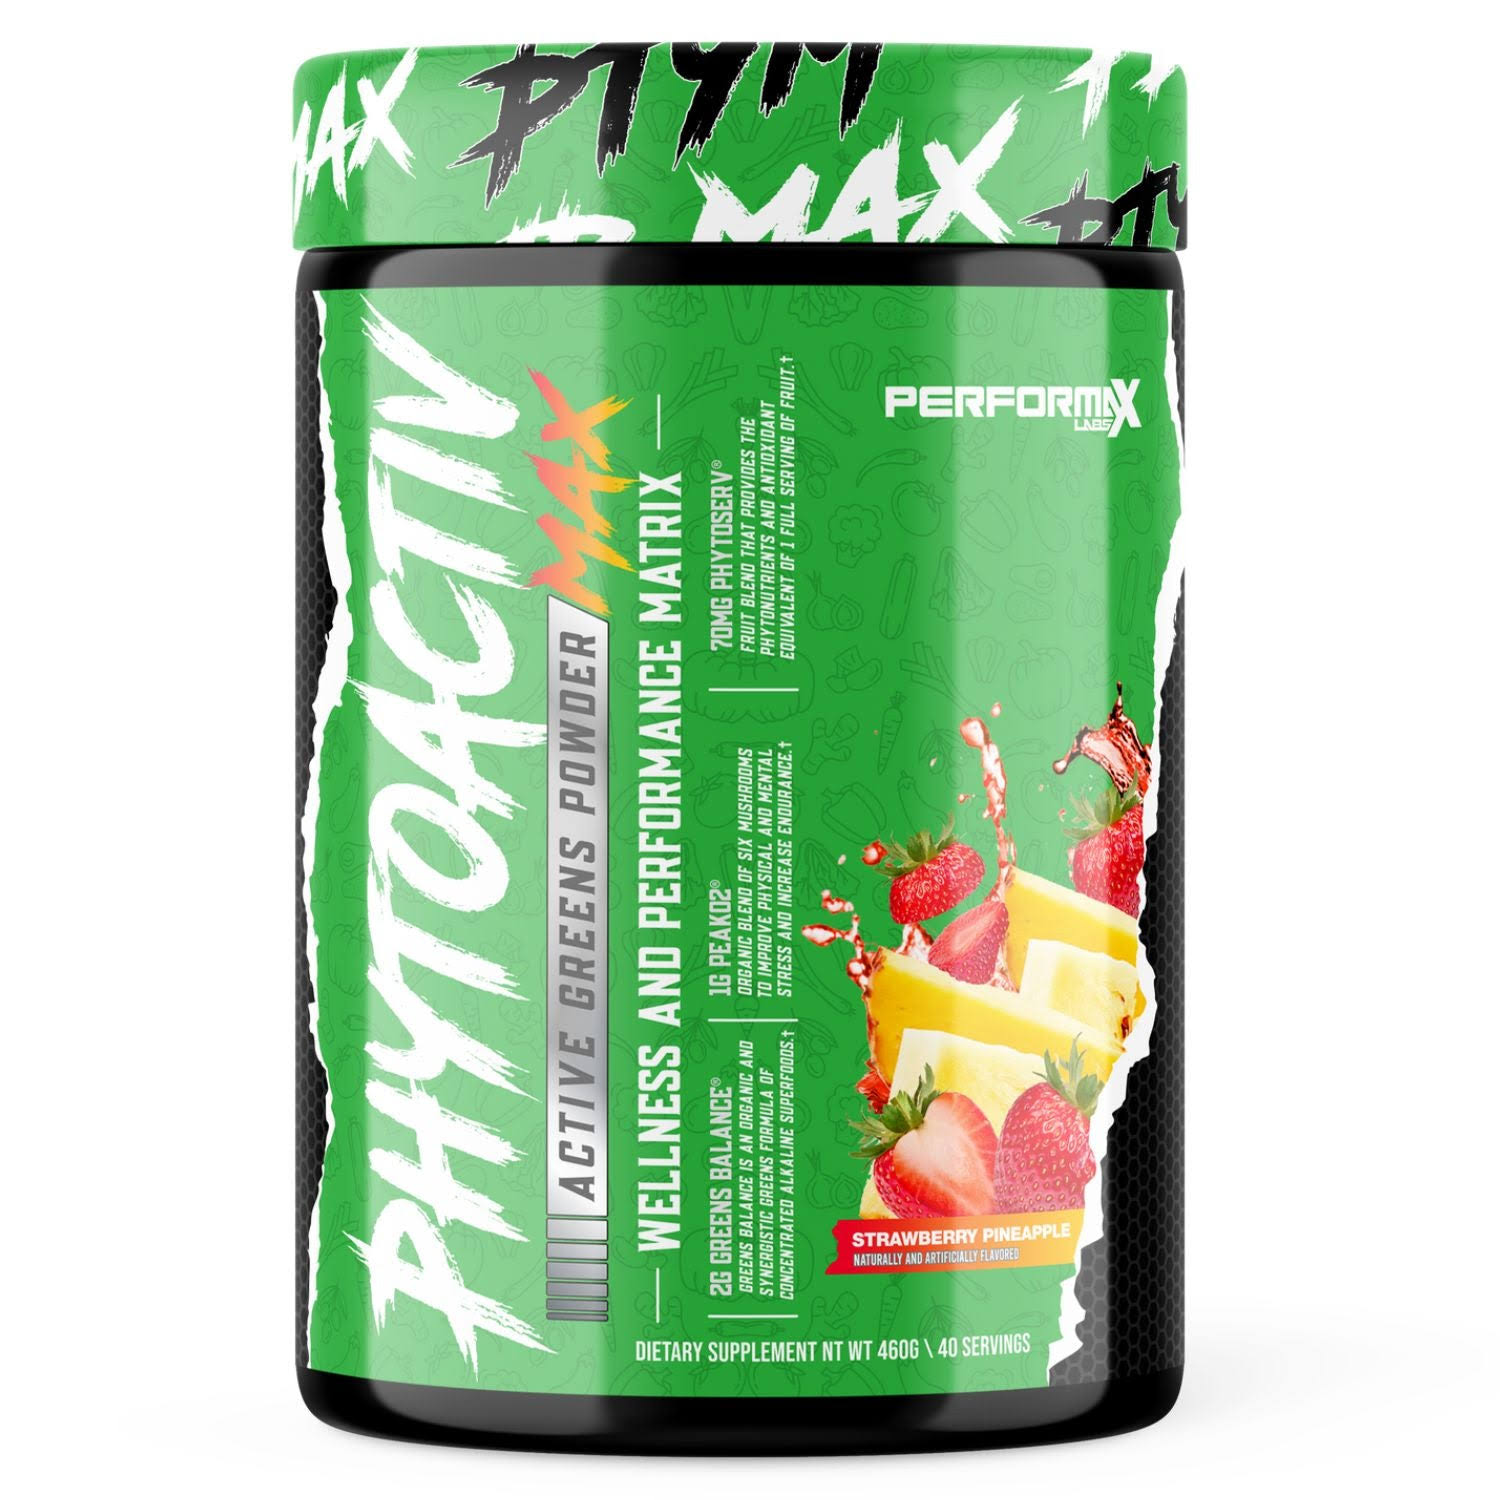 Performax Labs PhytoActivMax Strawberry Pineapple - 30 Servings